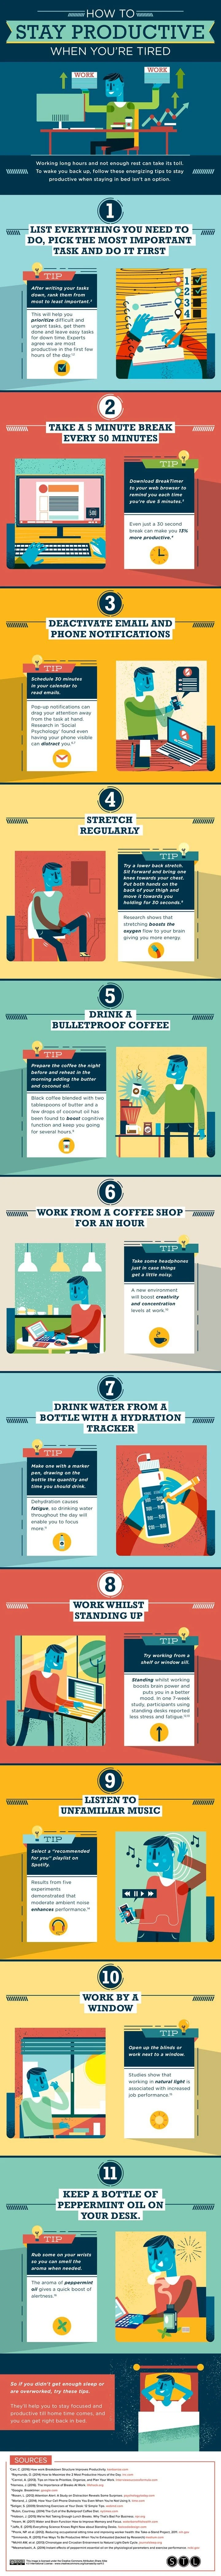 How to Stay Productive When You're Tired - #Infographic